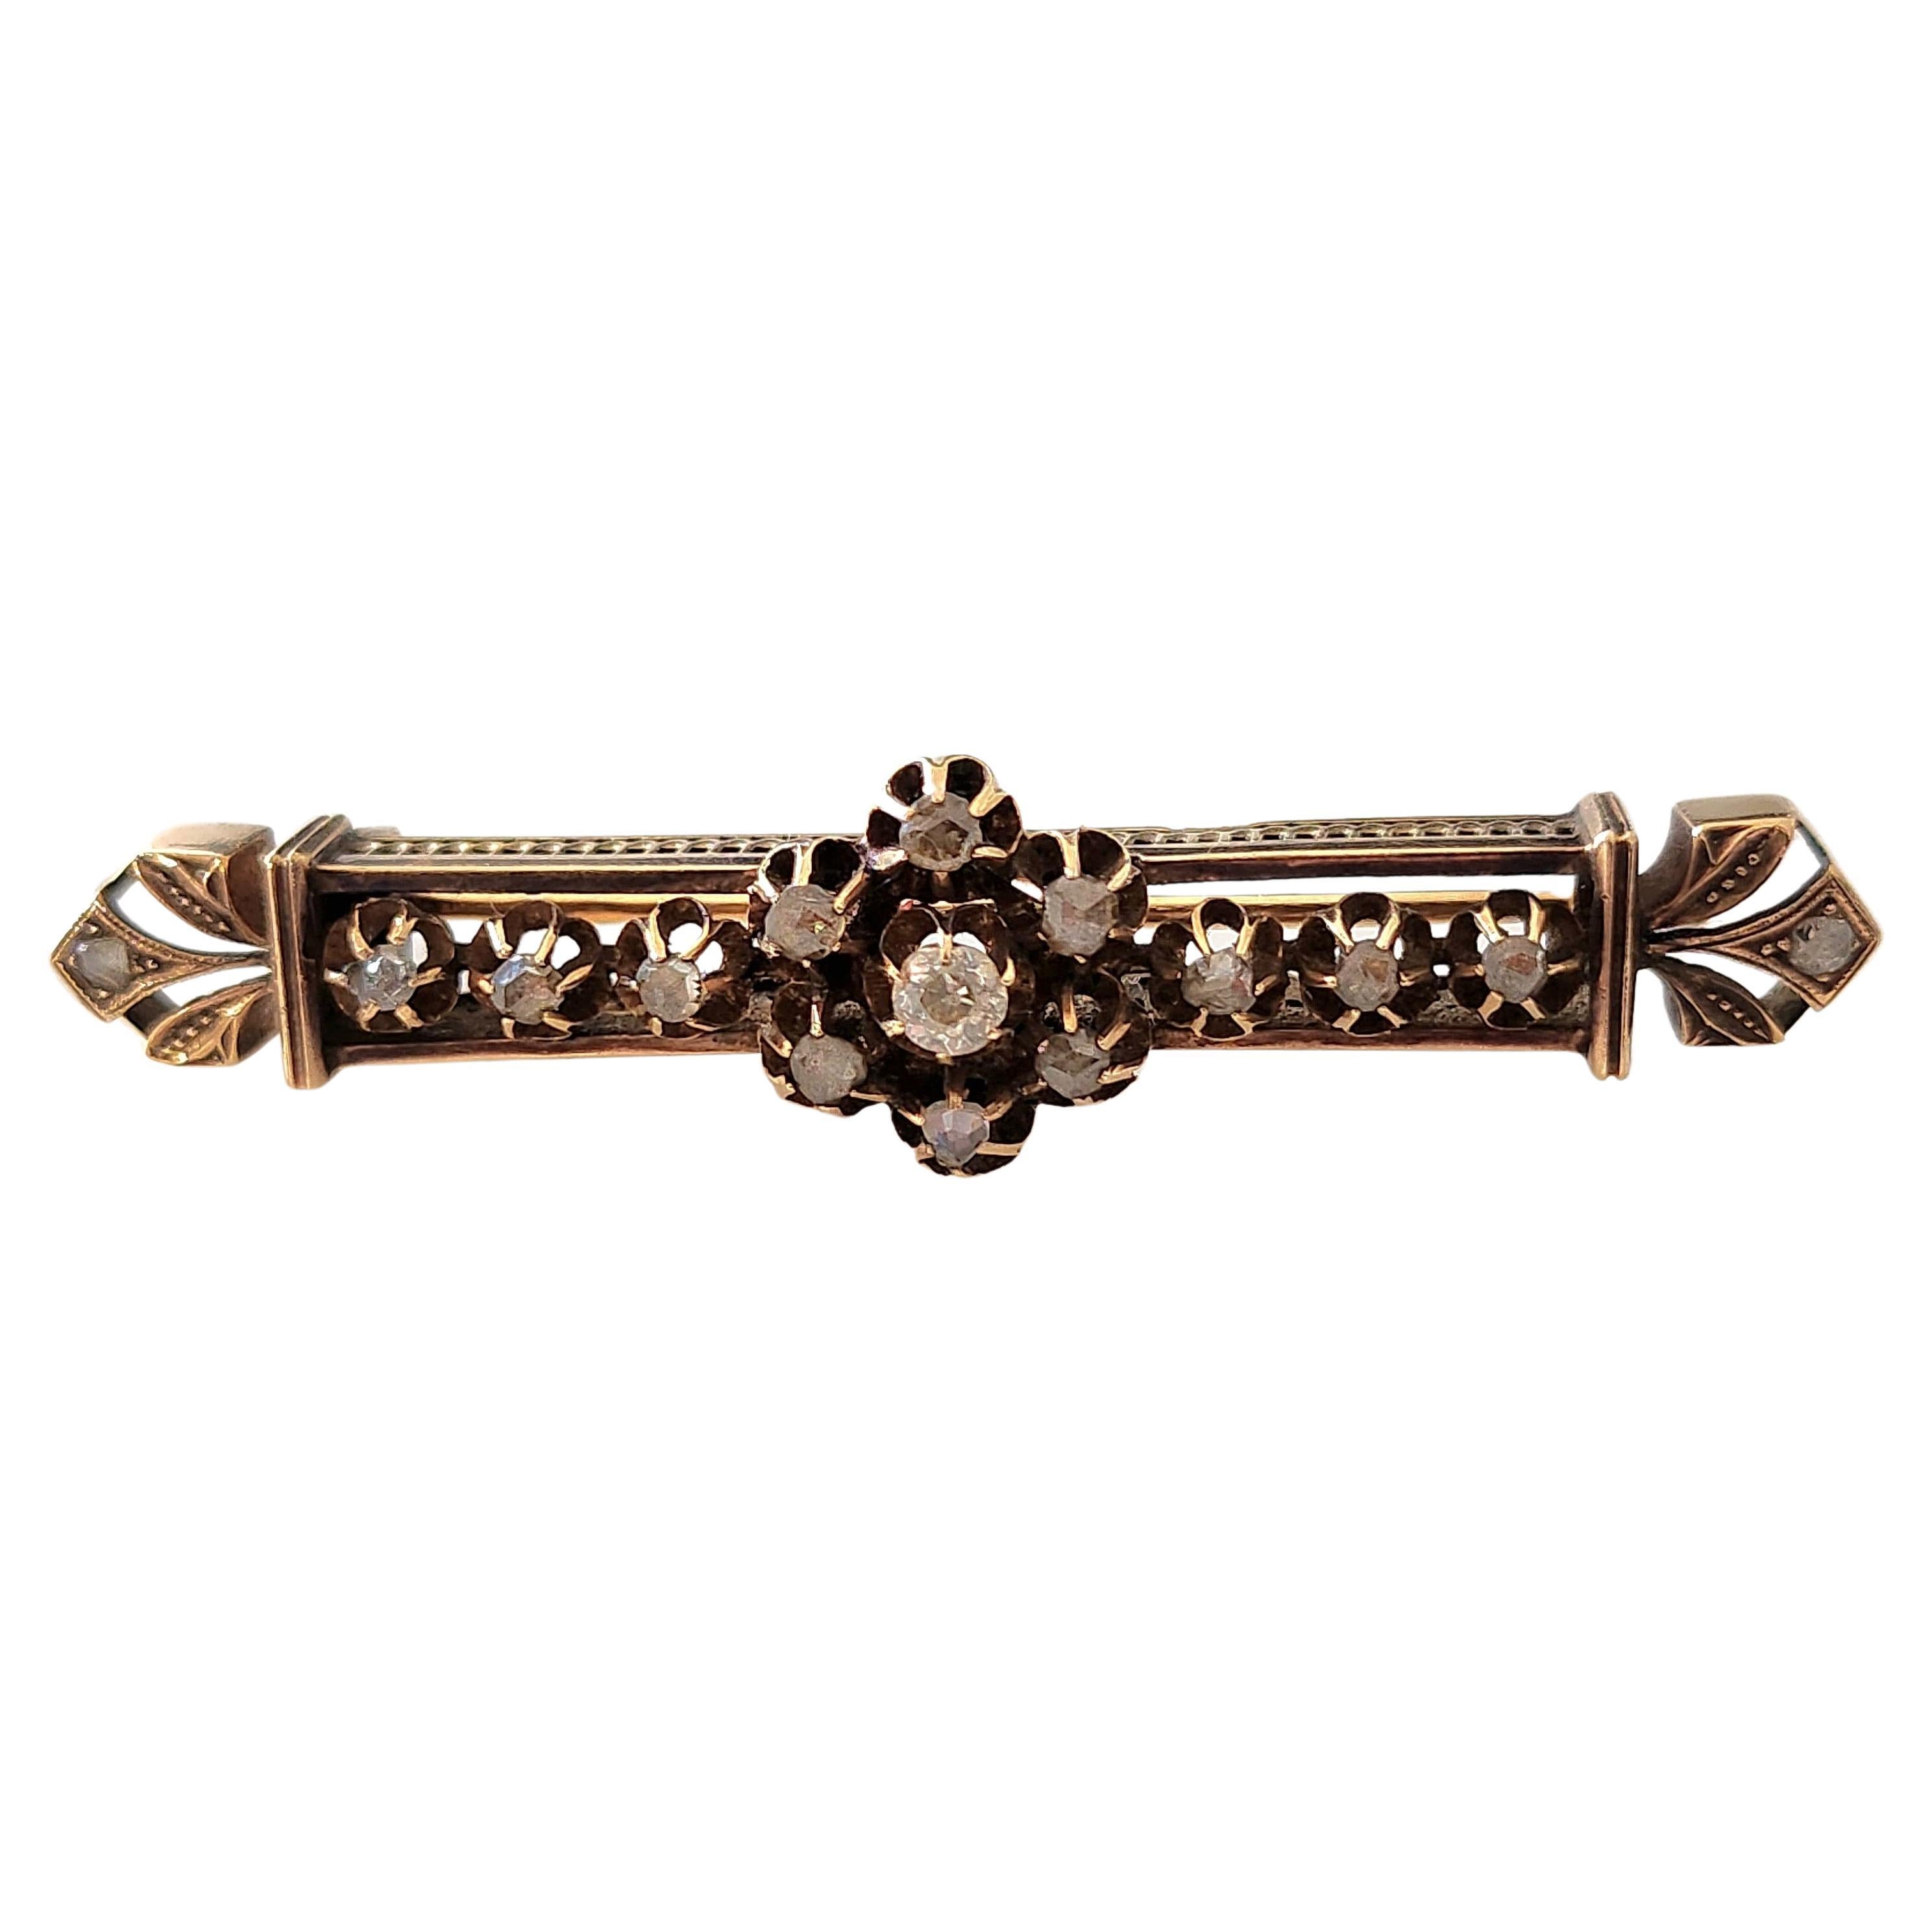 Antique 14k russian imperial era 1880.c brooch centered with 1 old mine cut diamond flanked with rose cut diamonds with magnificent workmanship total brooch lenght 5cm and gold weight of 8 grams hall marked 56 imperial russian gold standard and old